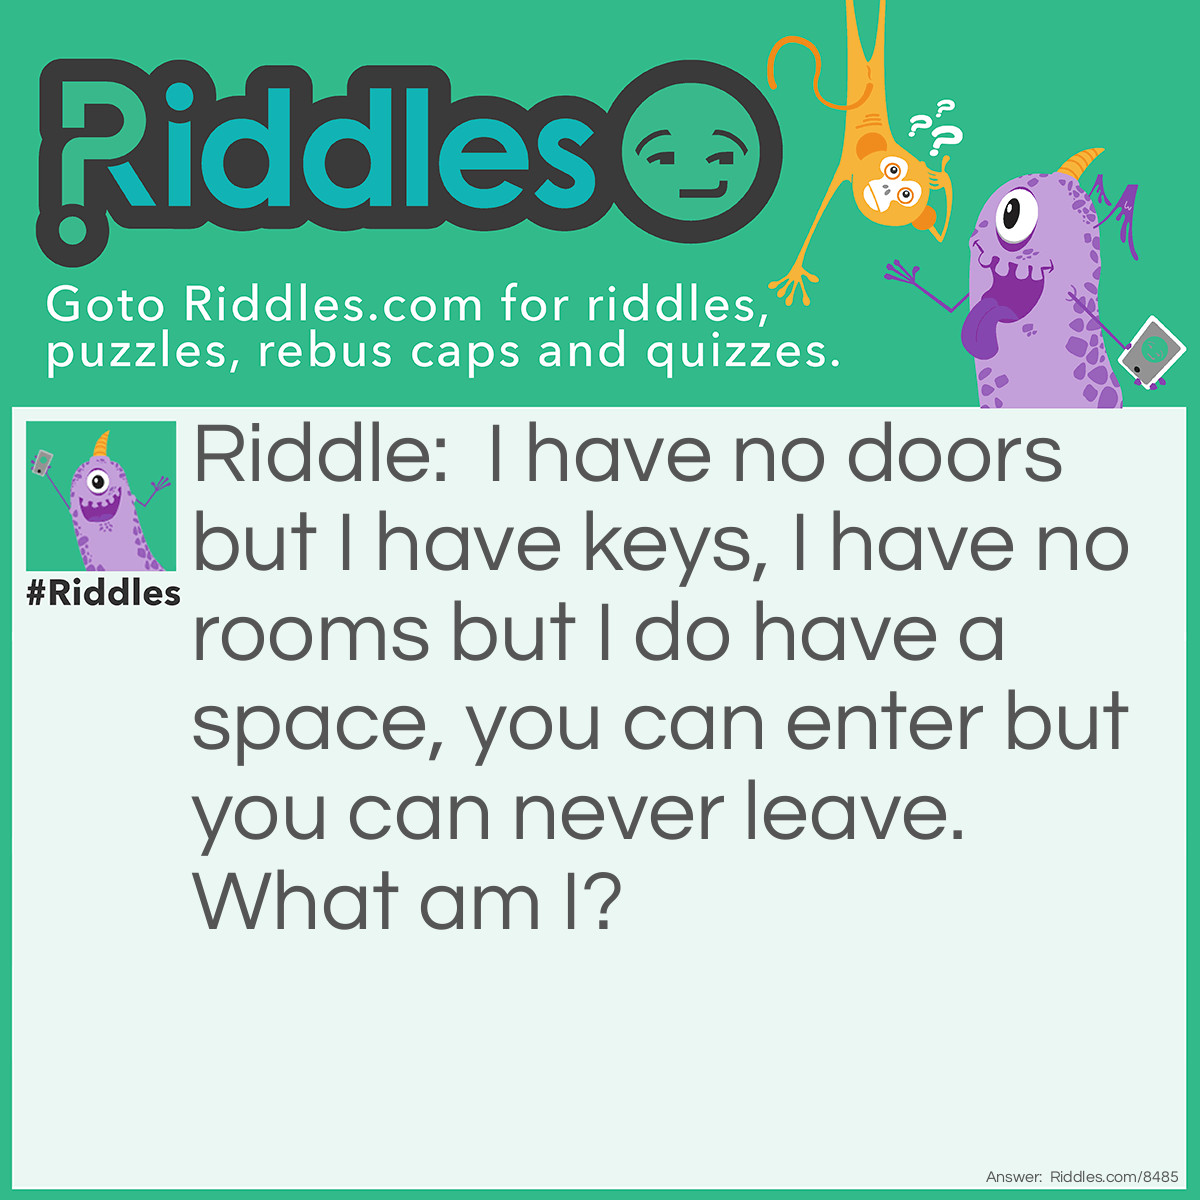 Riddle: I have no doors but I have keys, I have no rooms but I do have a space, you can enter but you can never leave. What am I? Answer: A key board.